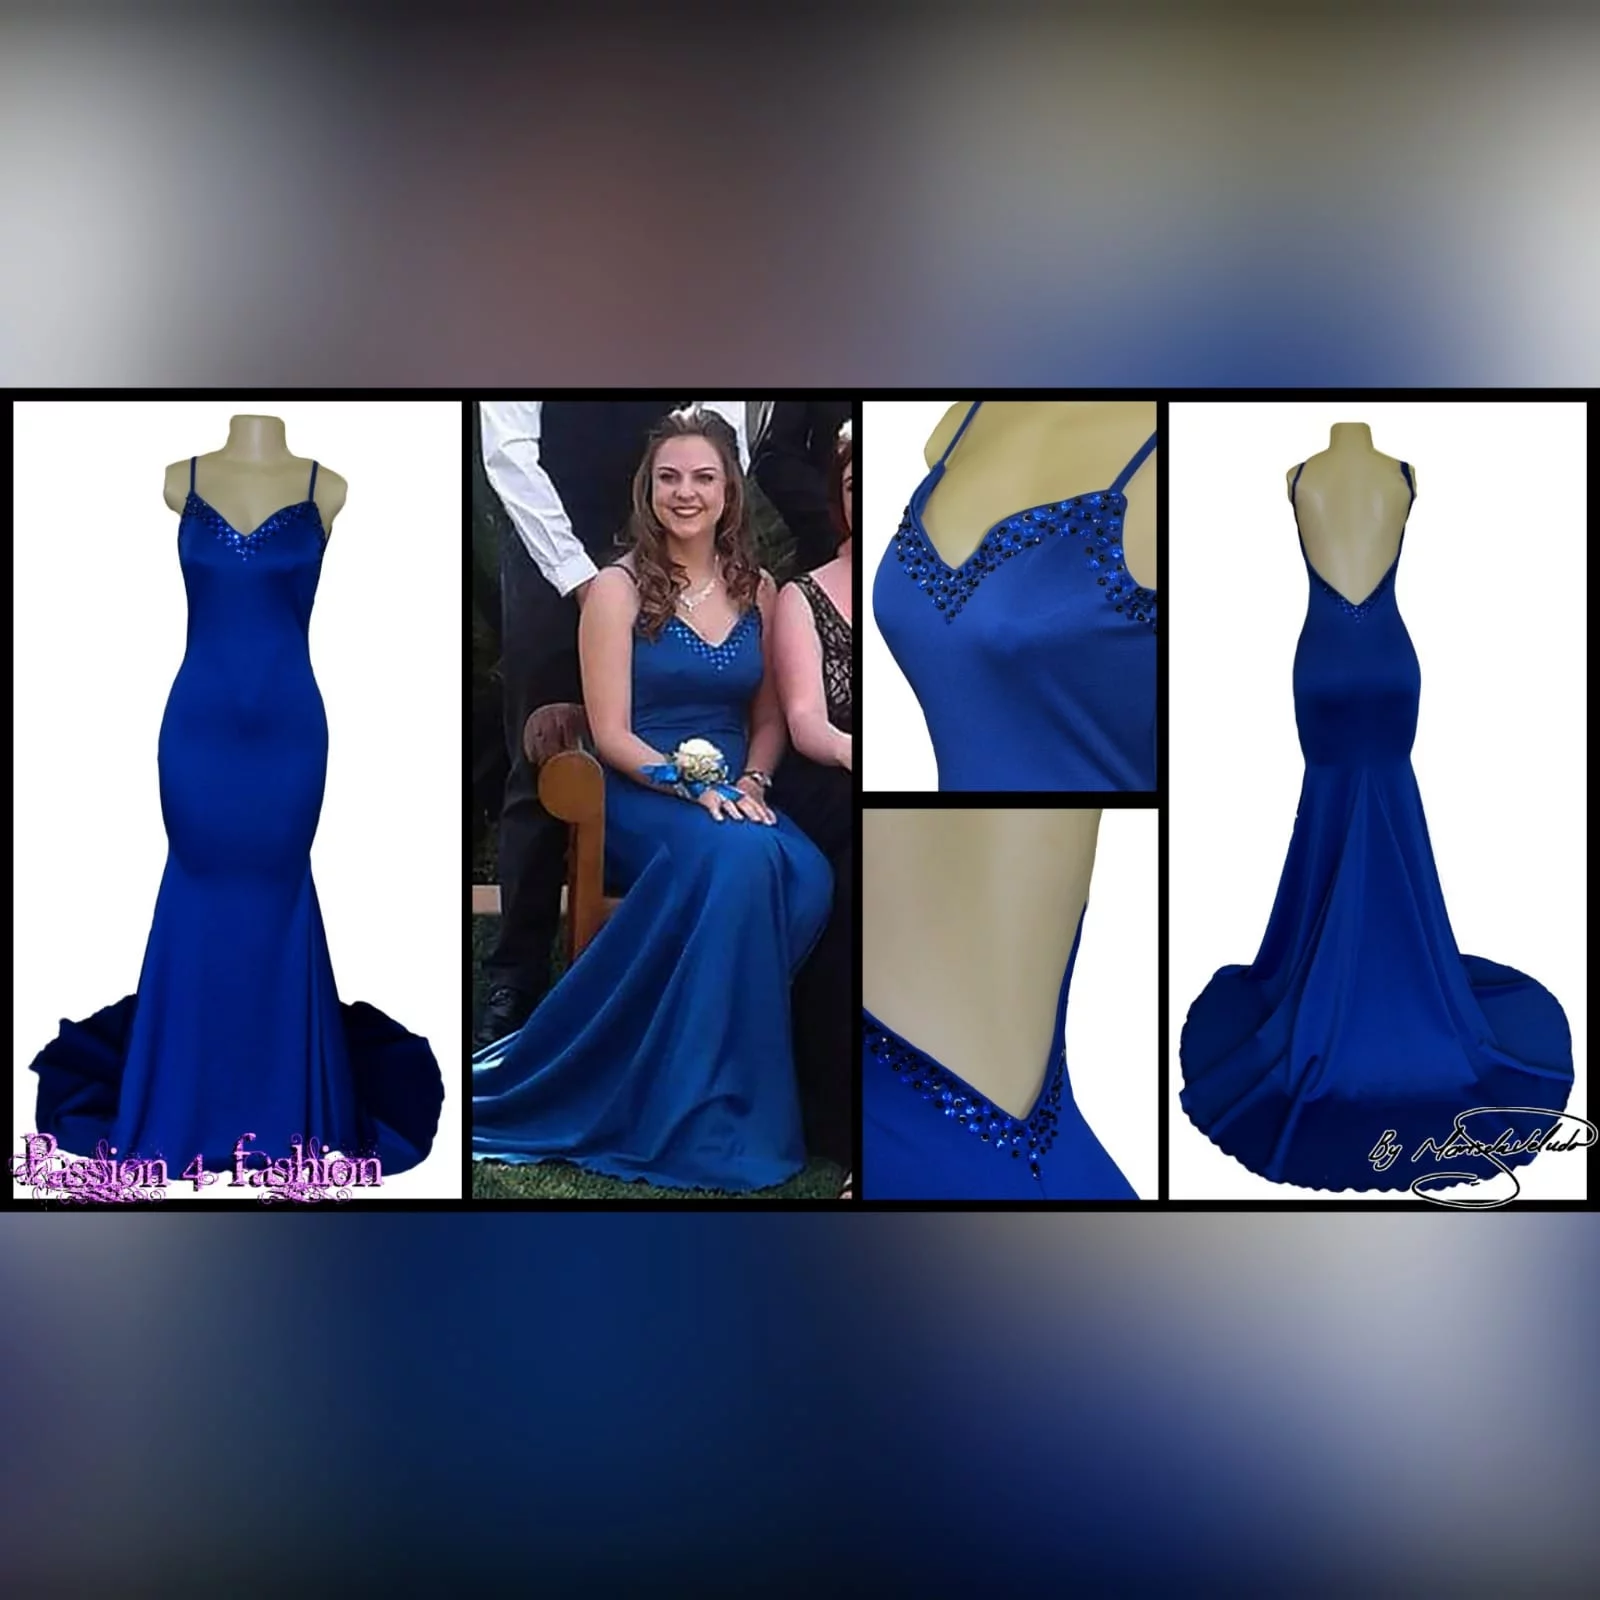 Royal blue soft mermaid beaded prom dress 5 royal blue soft mermaid beaded prom dress, with a v neckline, low v open back detailed with blue and black beads, thin shoulder straps and a long train.